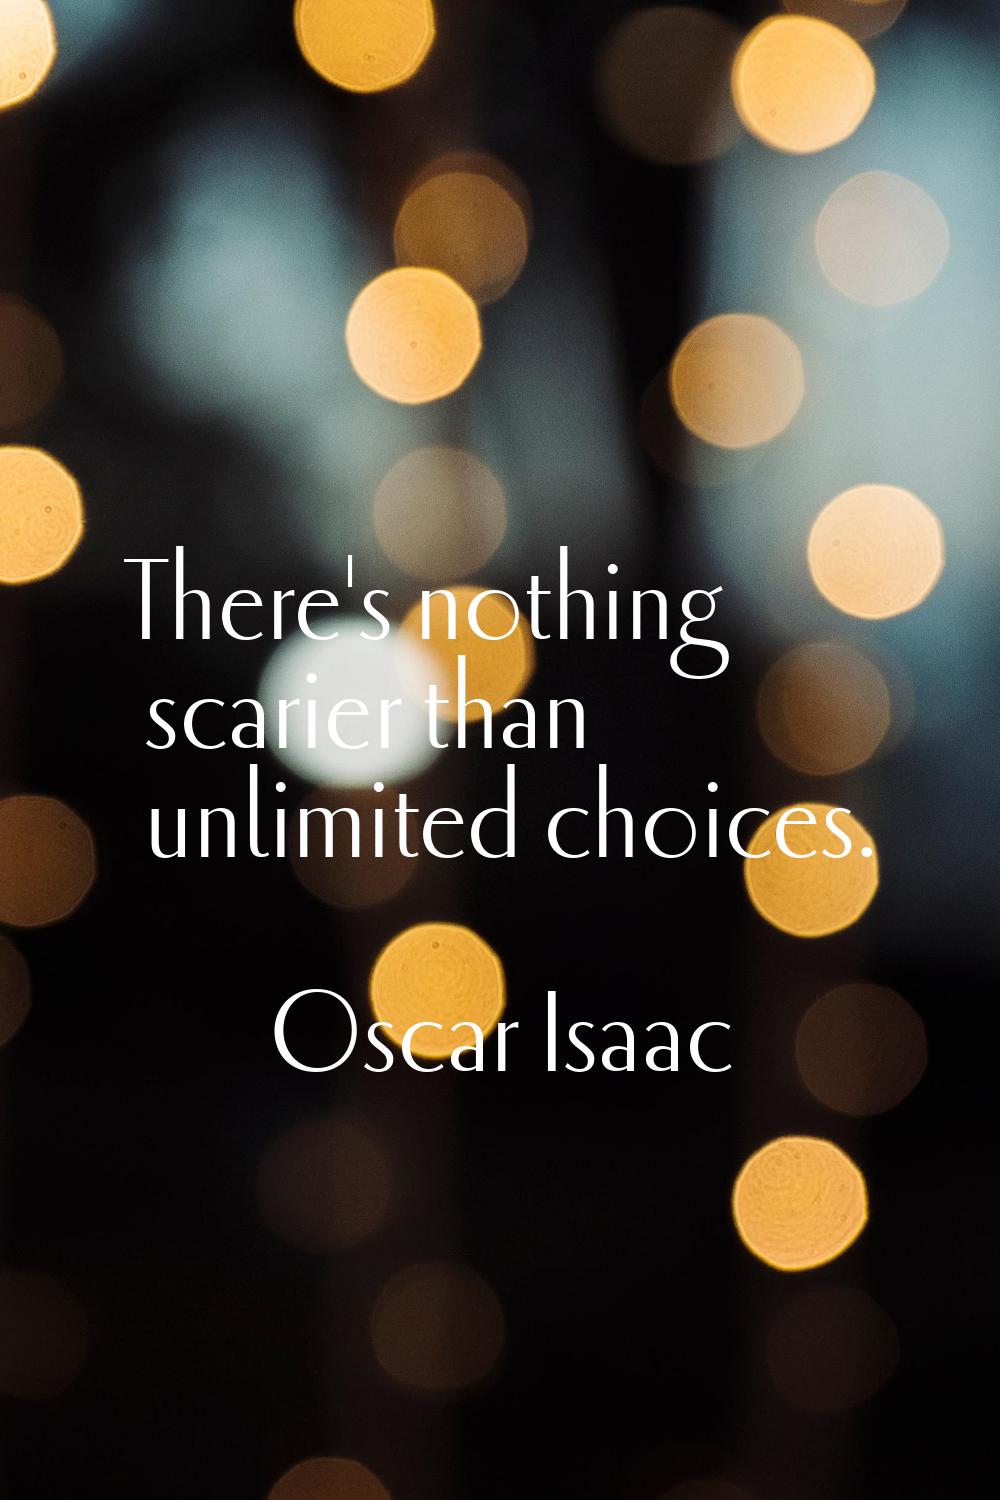 There's nothing scarier than unlimited choices.